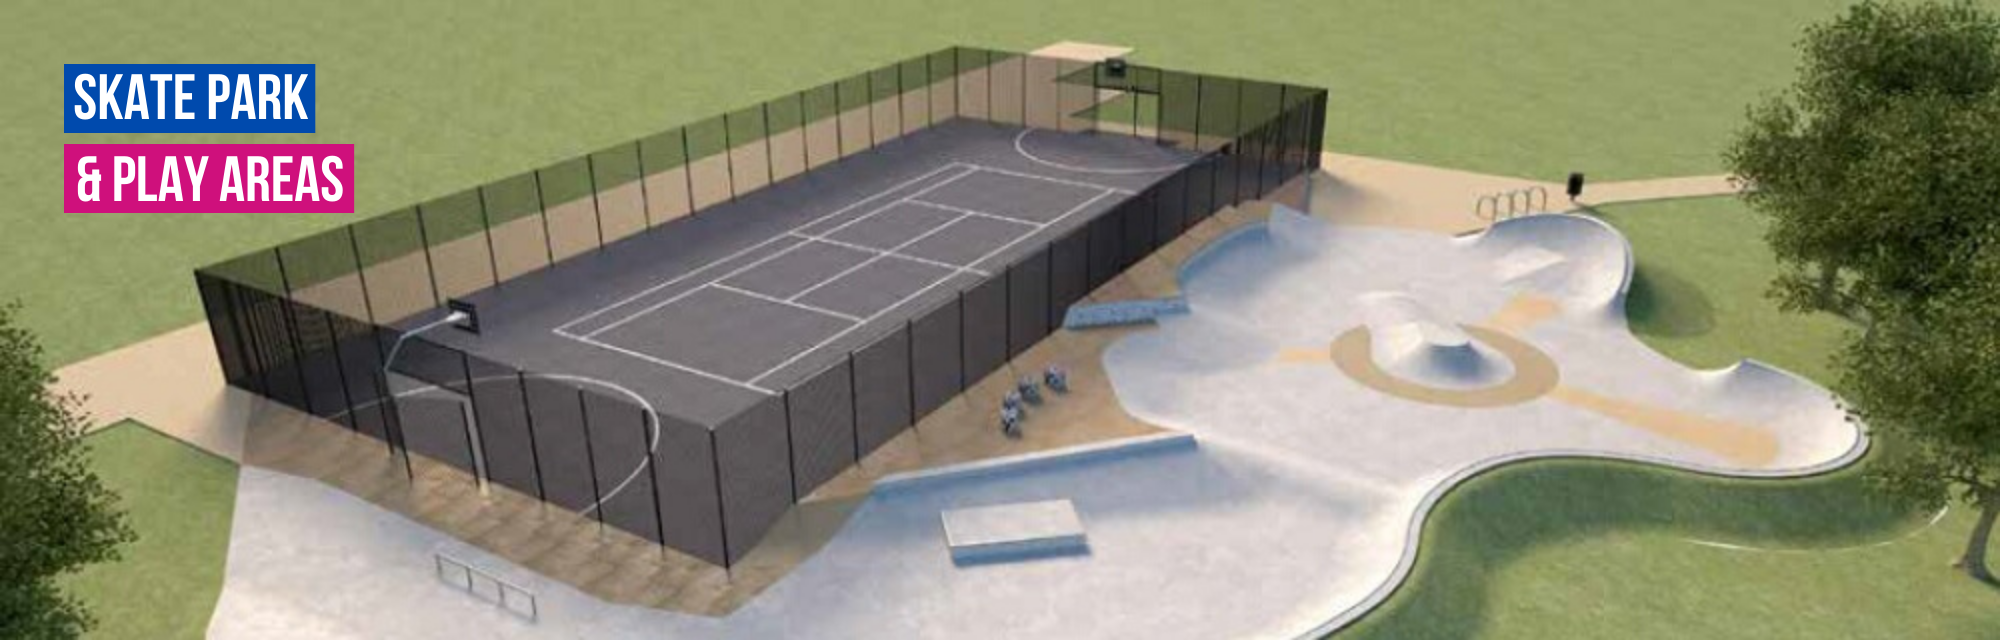 Artist's impression of a basketball court and skate park